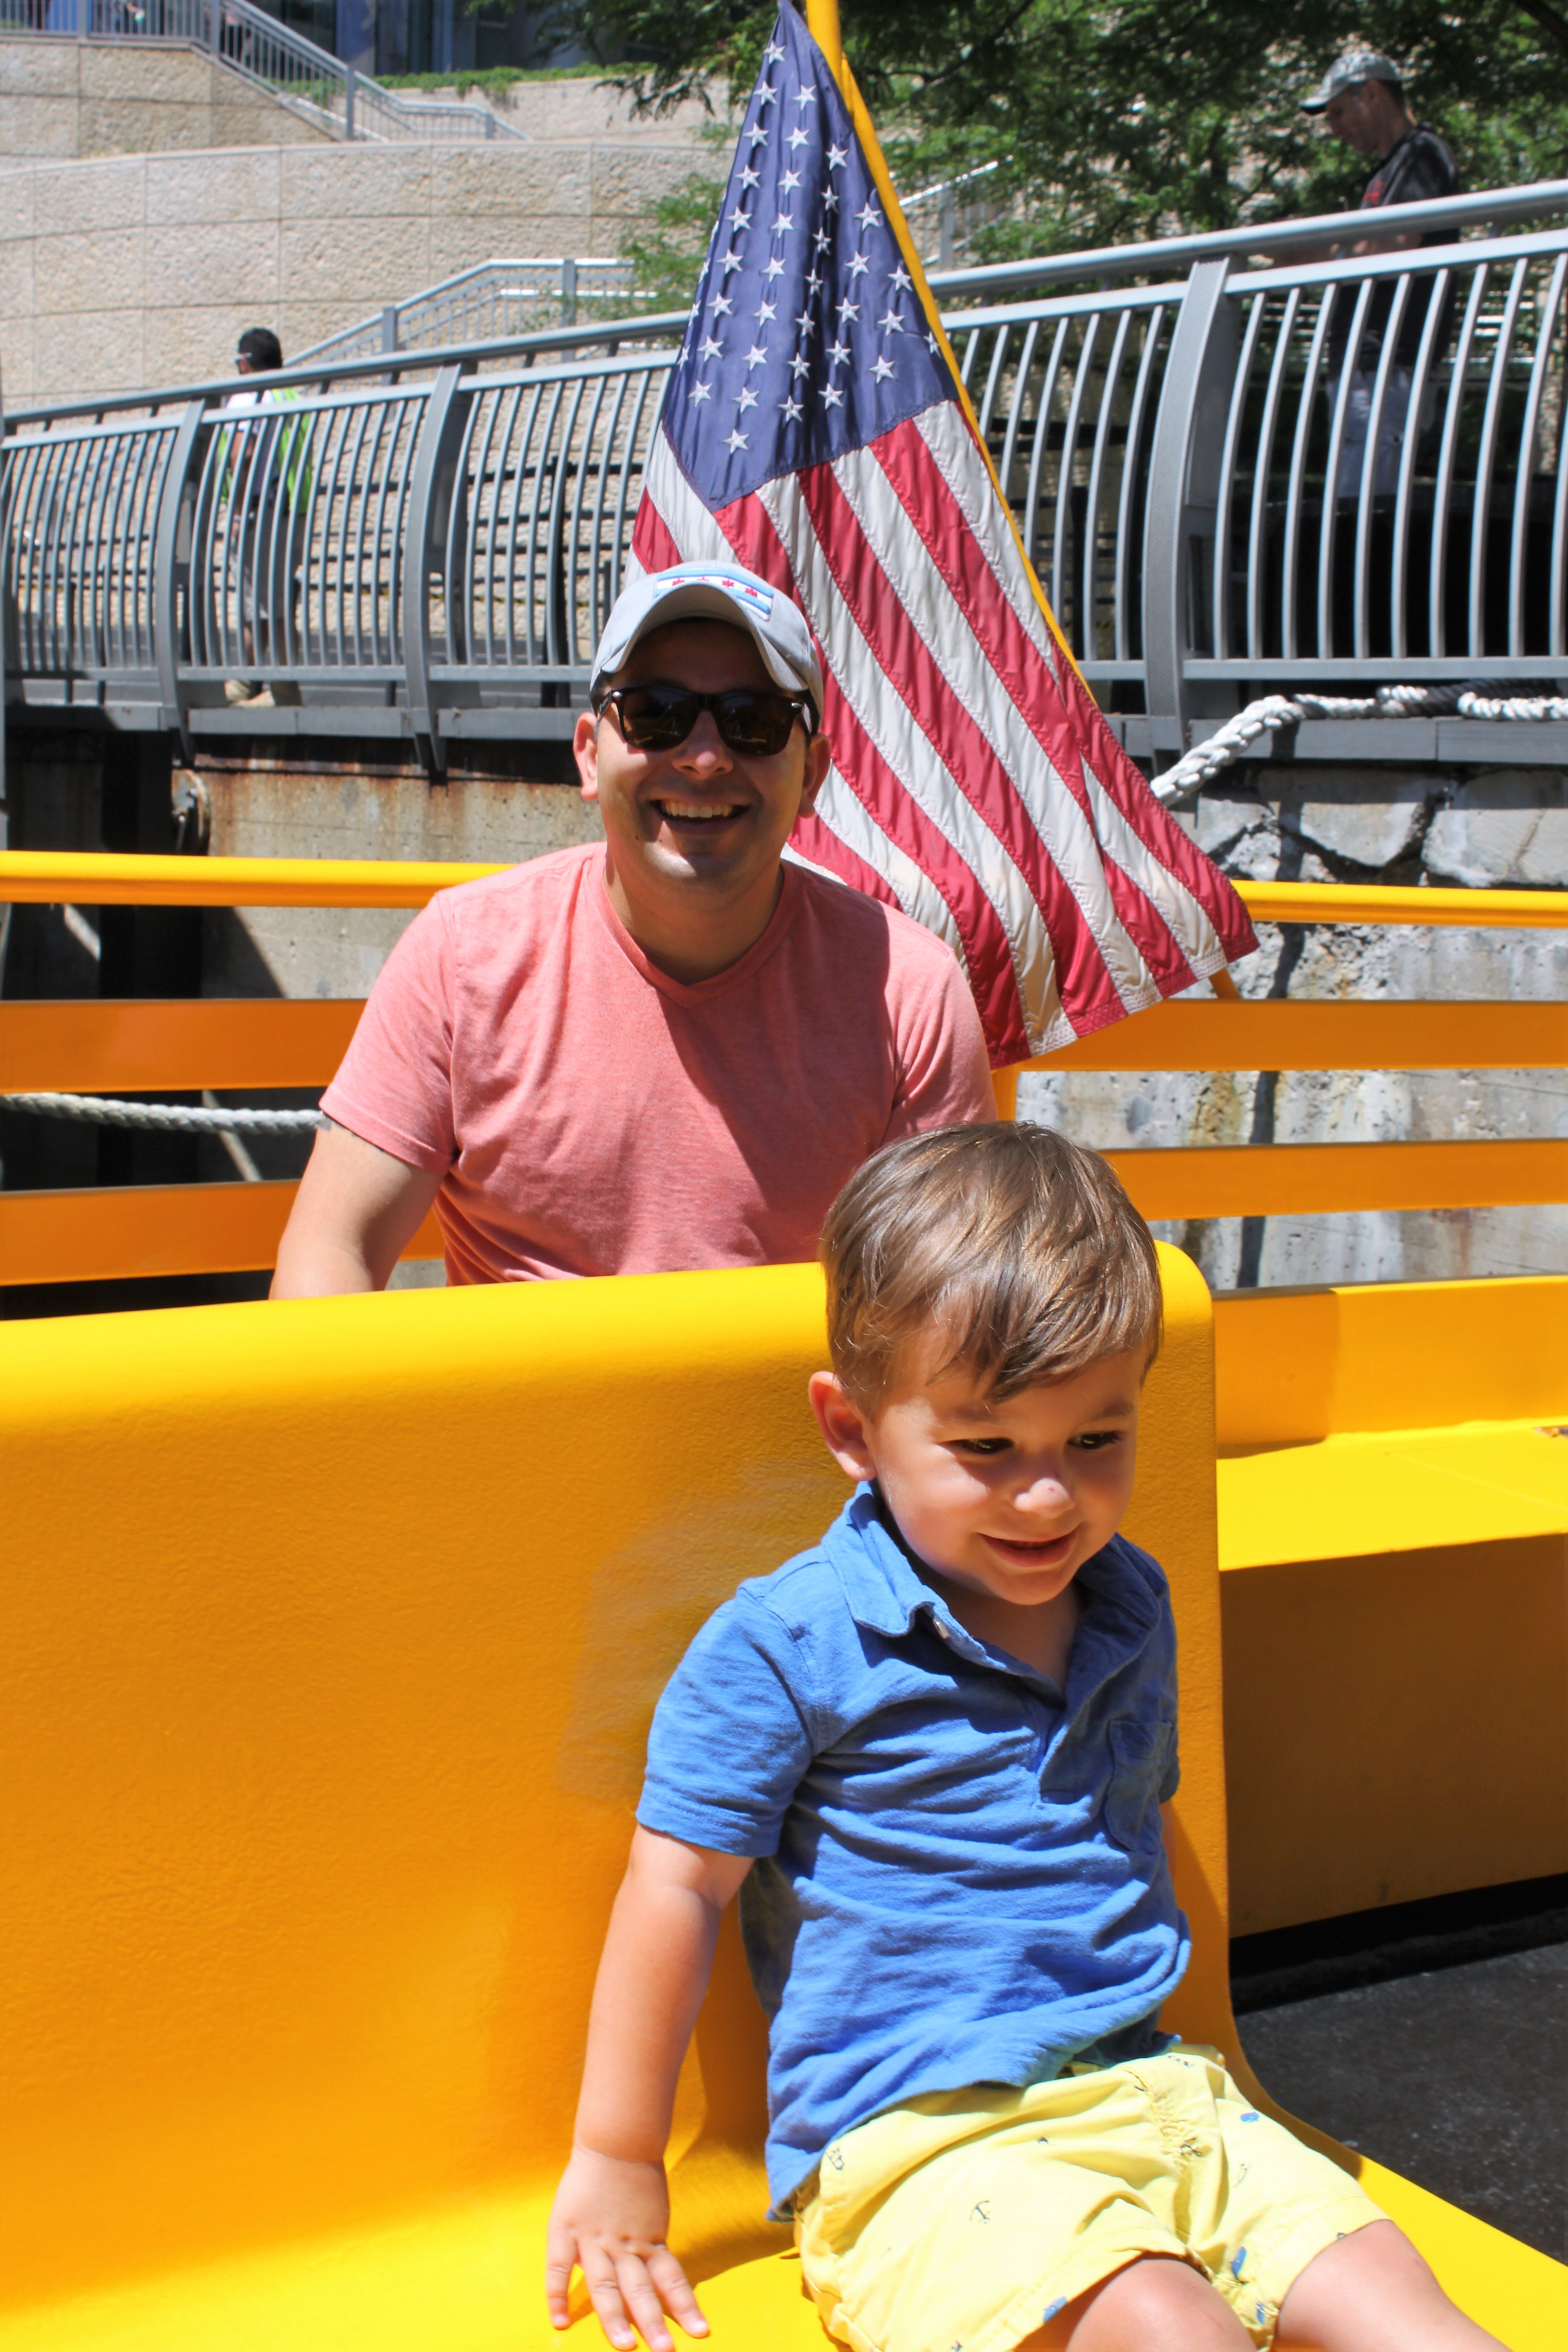 Water Taxi on the Chicago River is perfect for families in the summer